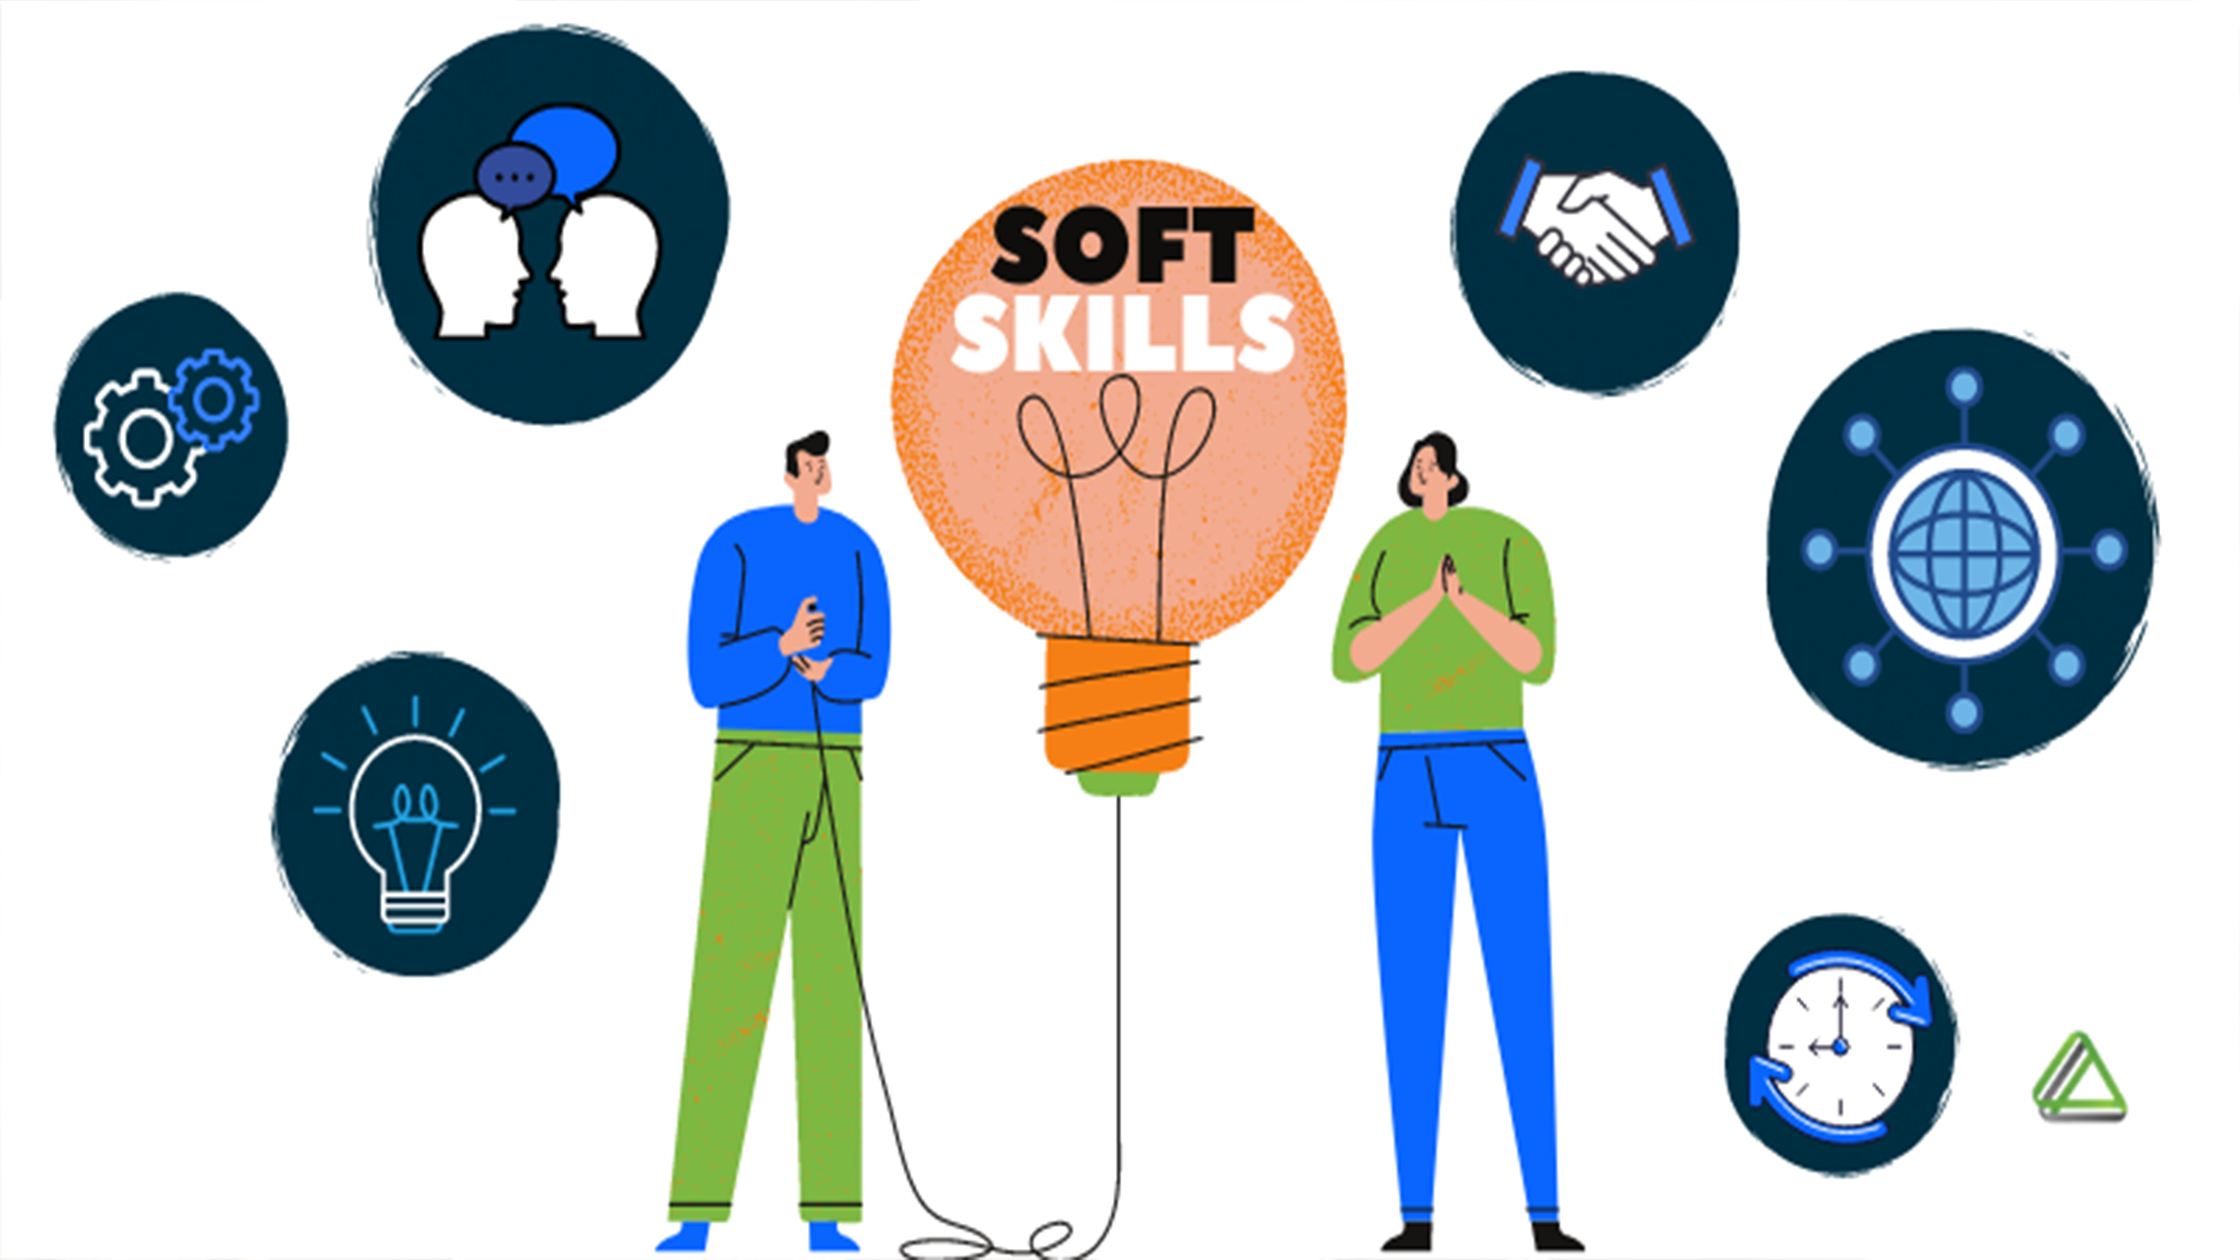 How soft skills can be developed at the workplace